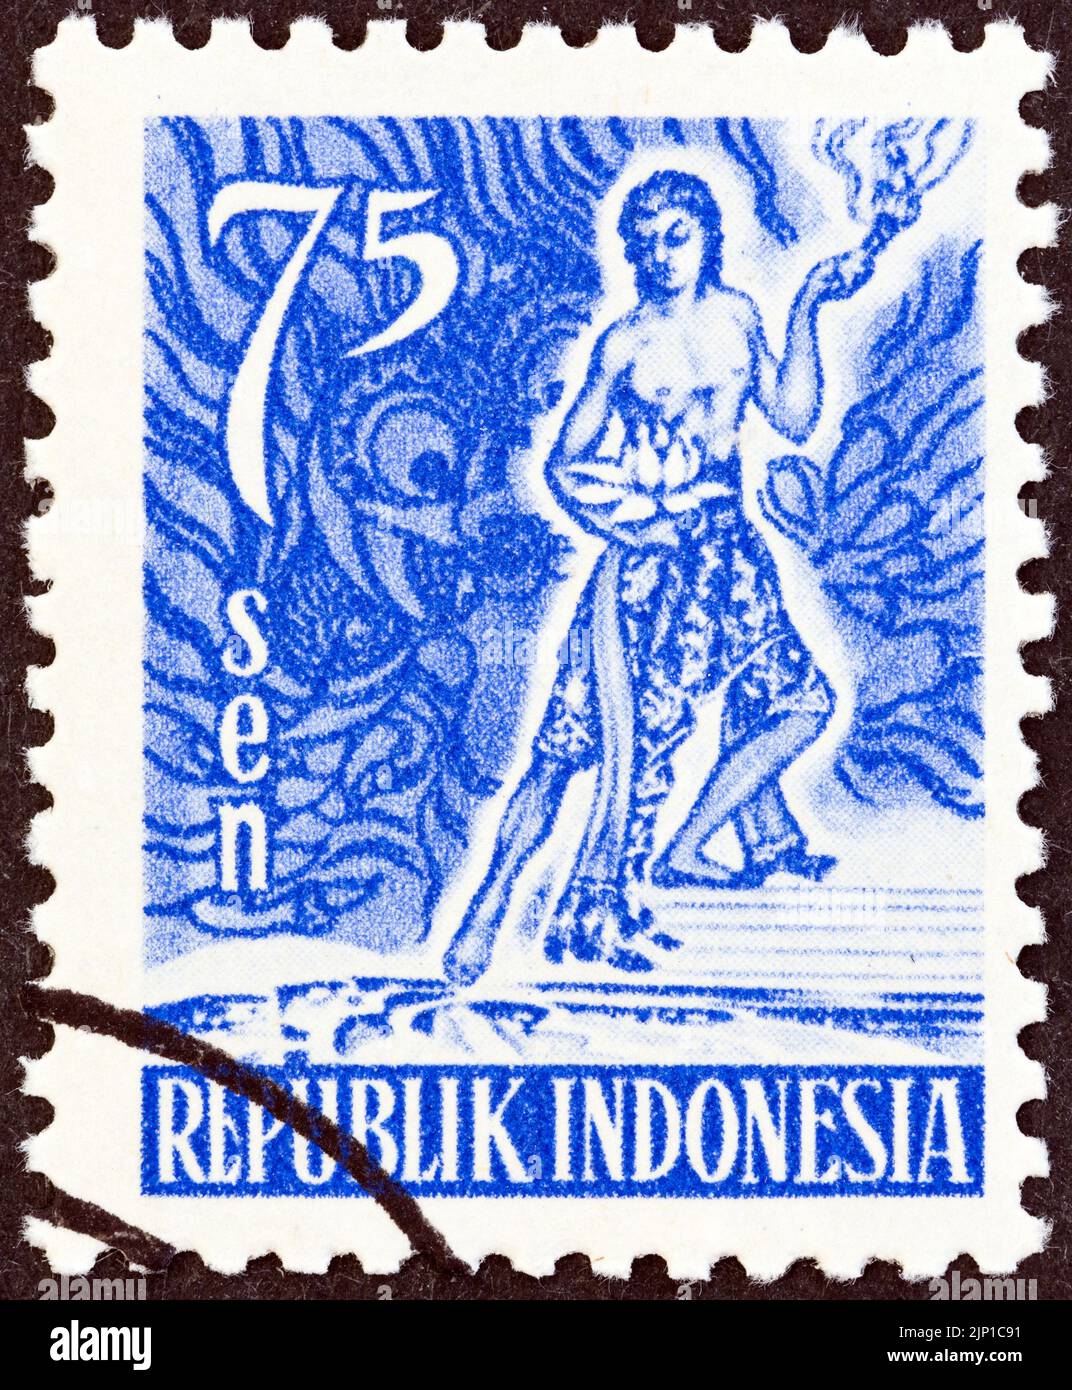 INDONESIA - CIRCA 1951: A stamp printed in Indonesia shows Spirit of Indonesia, circa 1951. Stock Photo